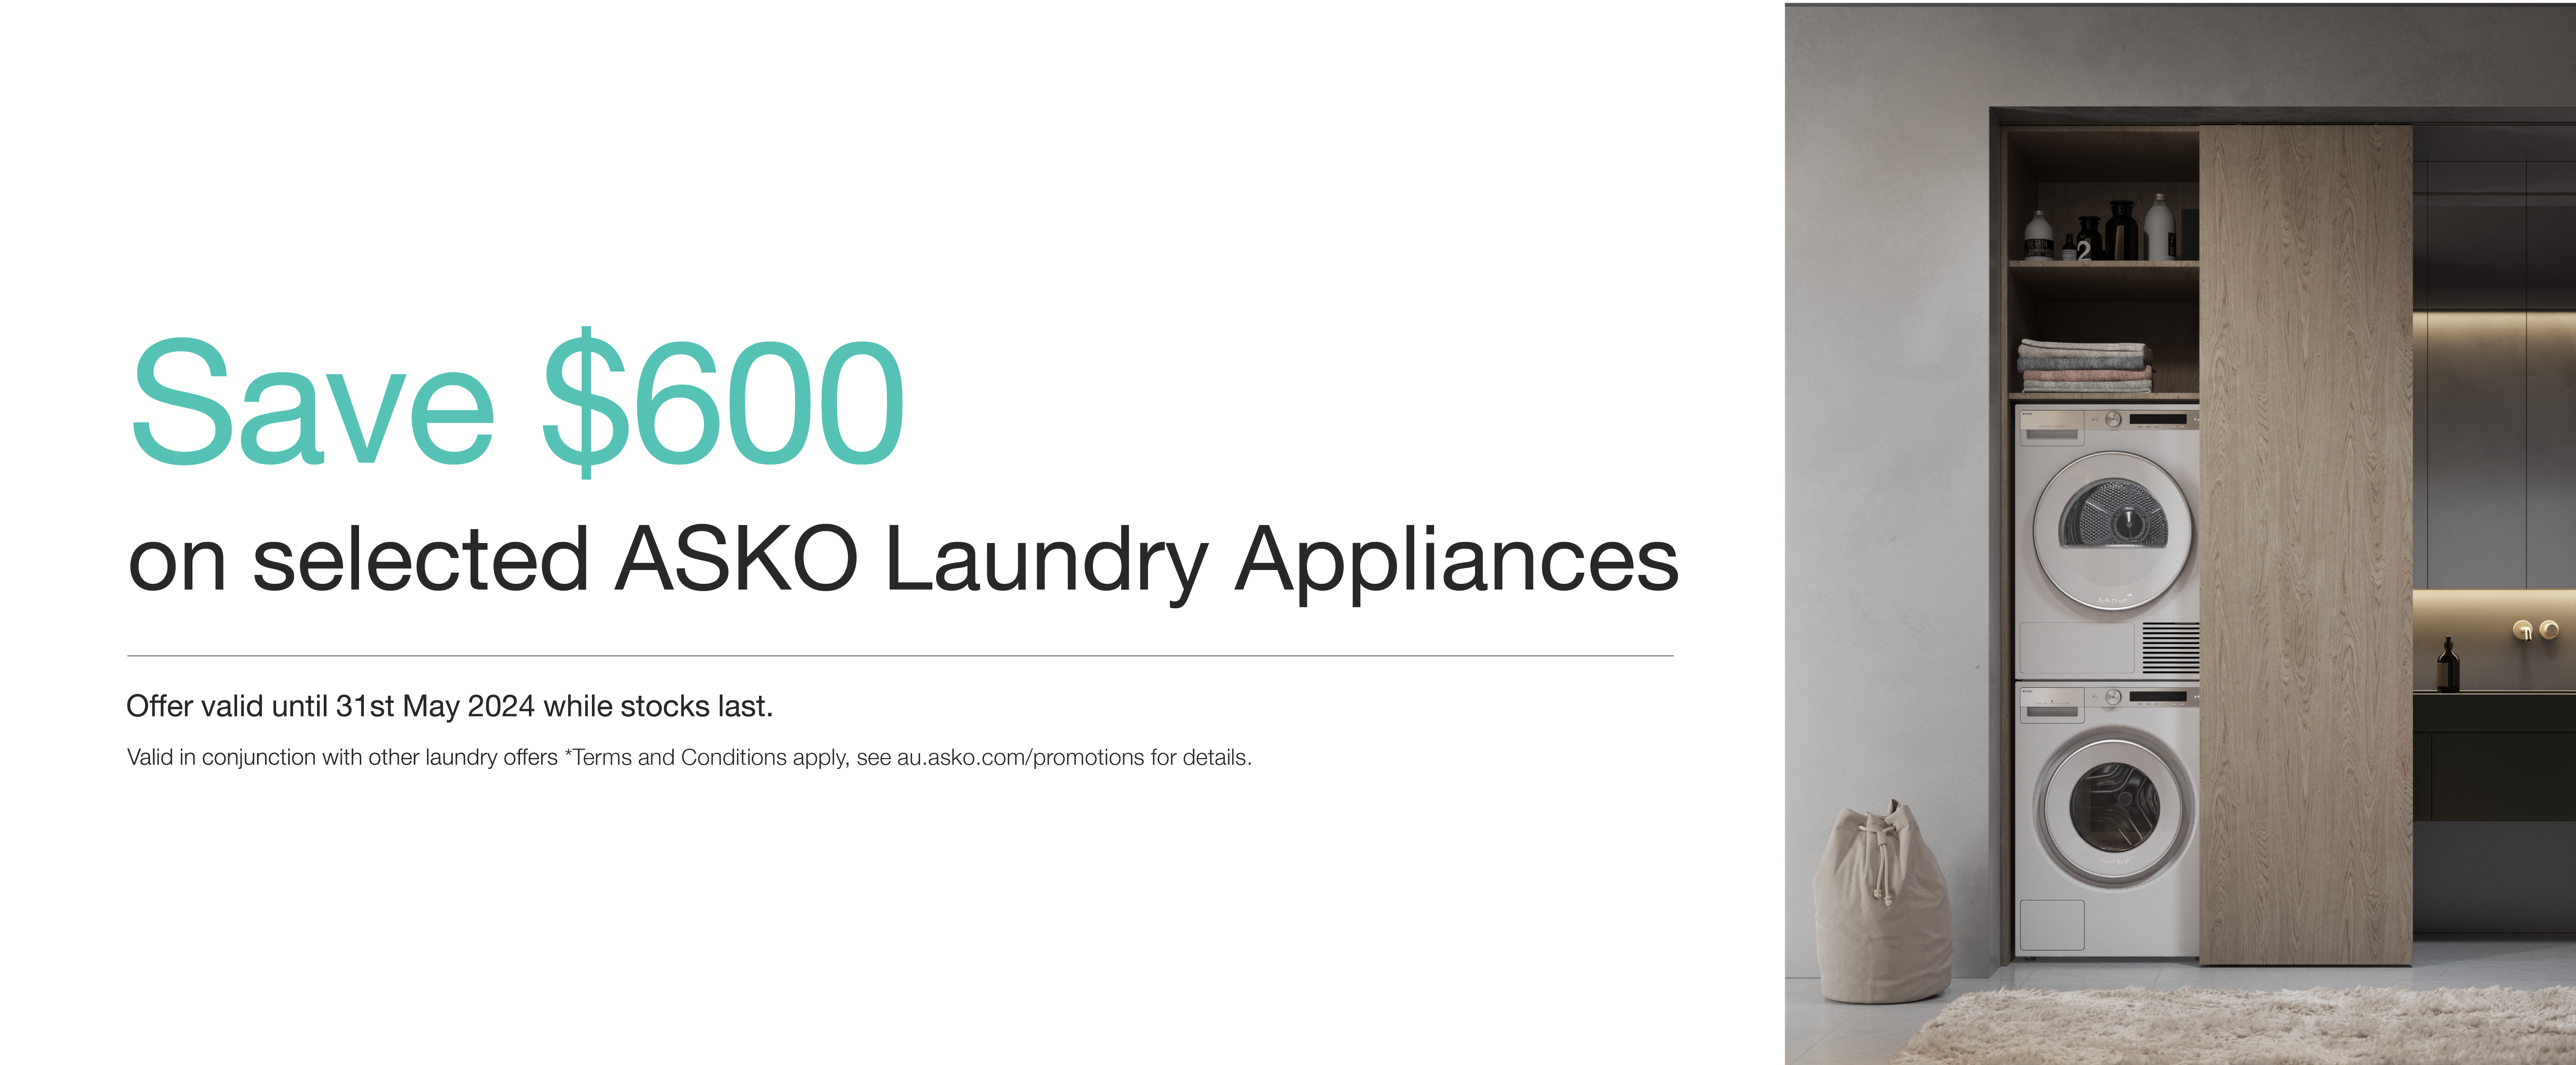 Save Up To $600 on Selected ASKO Washing Machines